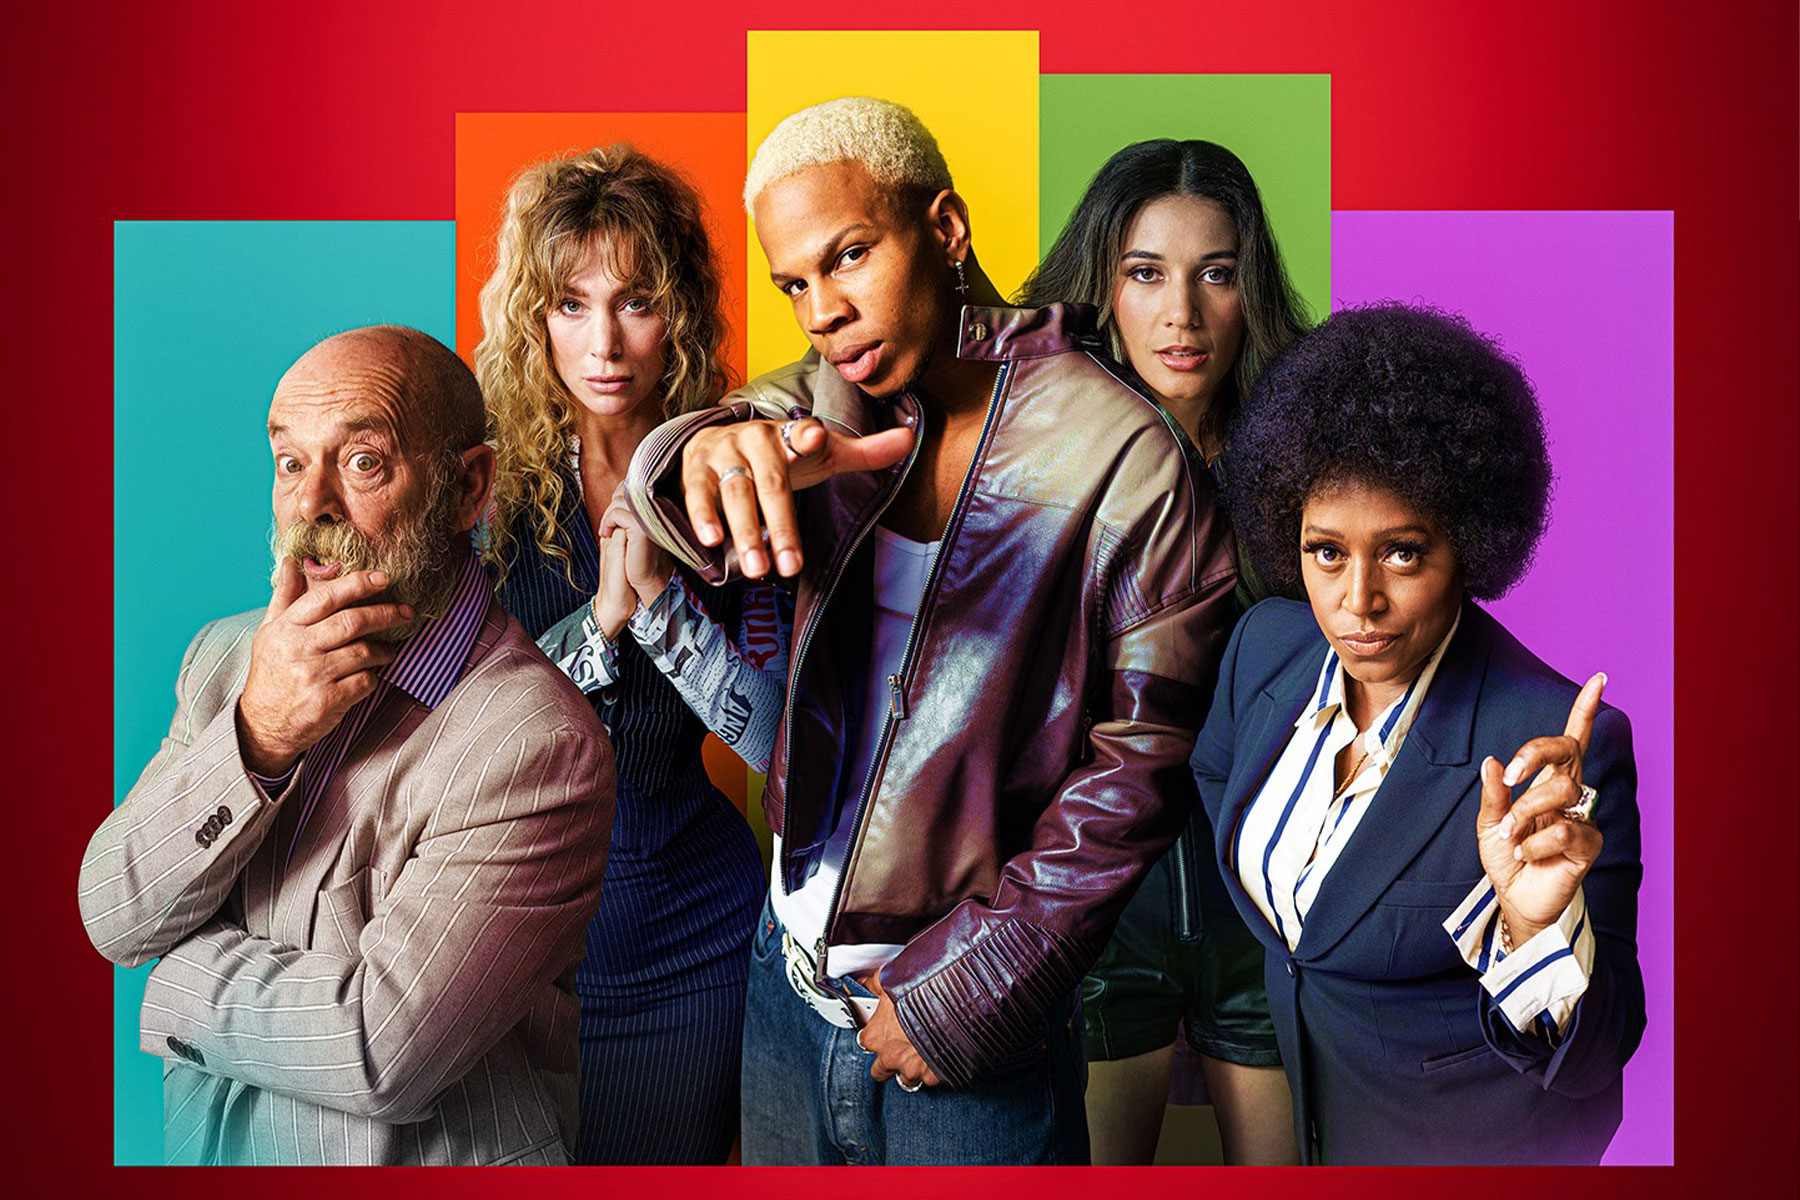 Keith Allen, Jodie Steele, Christian Maynard, Maiya Quansah-Breed and Mica Paris in a promotional image for Rehab the Musical